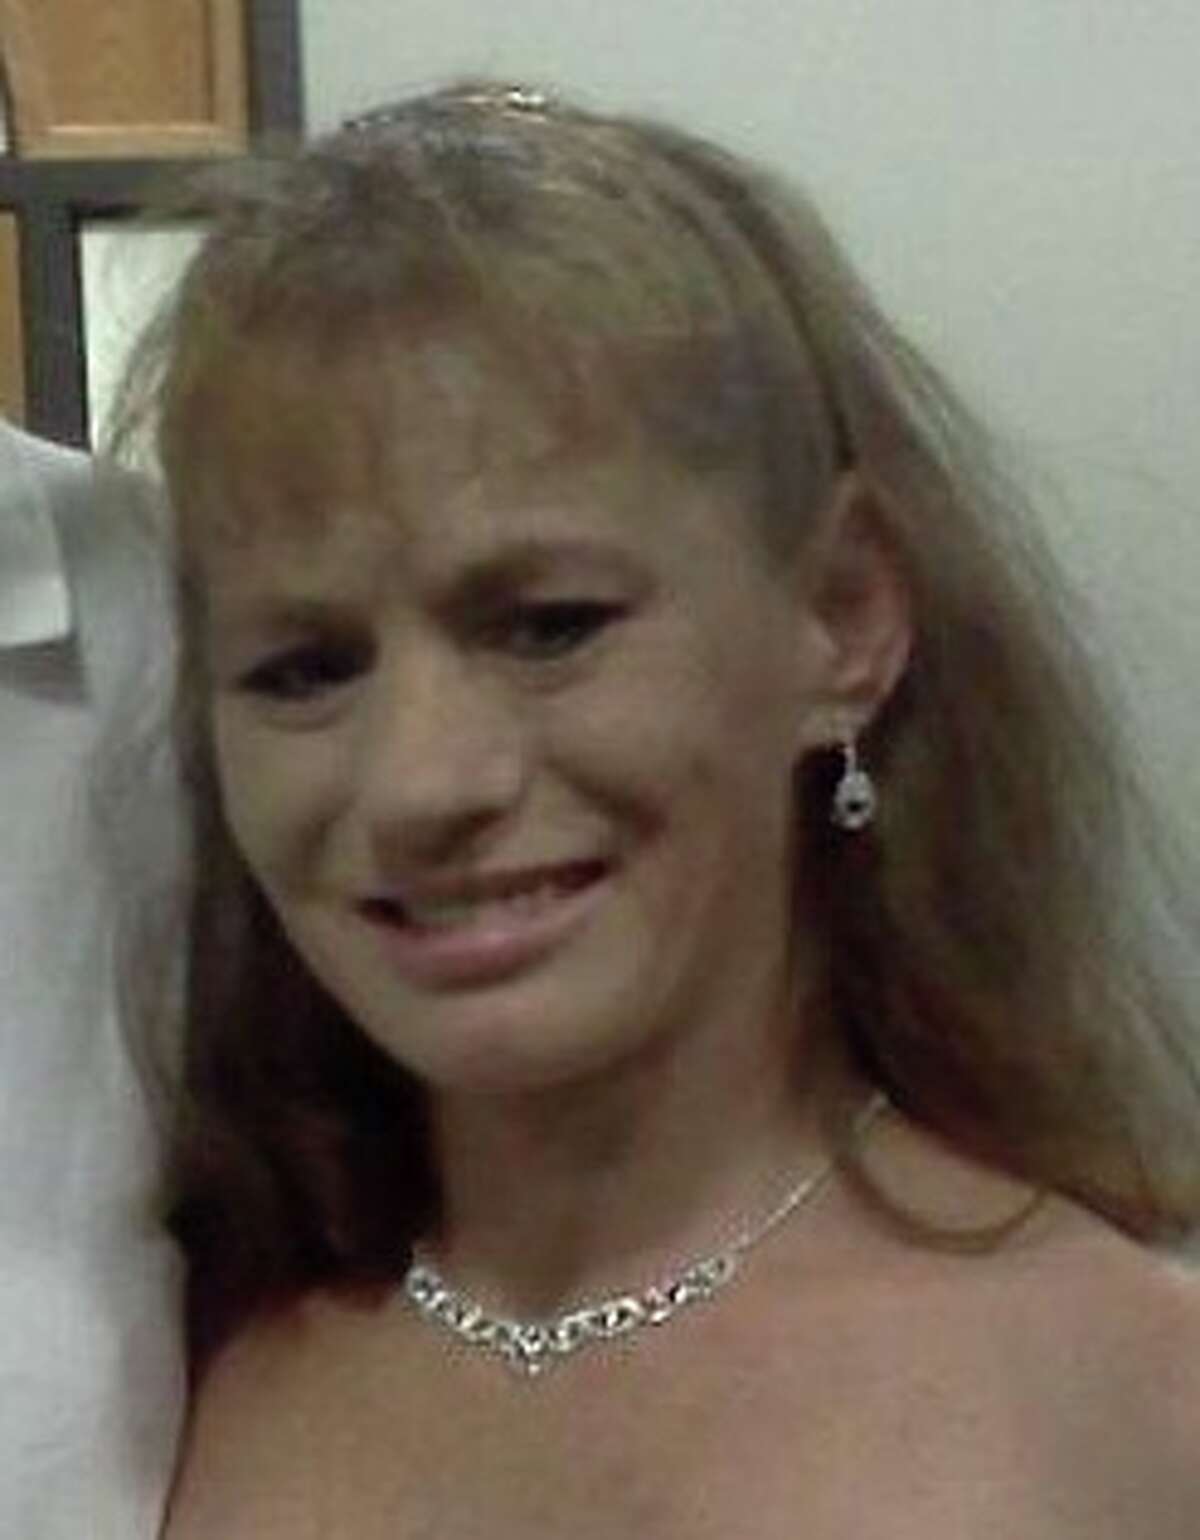 Tami Diane Higginbotham, 41, from Vinton has been reported missing.